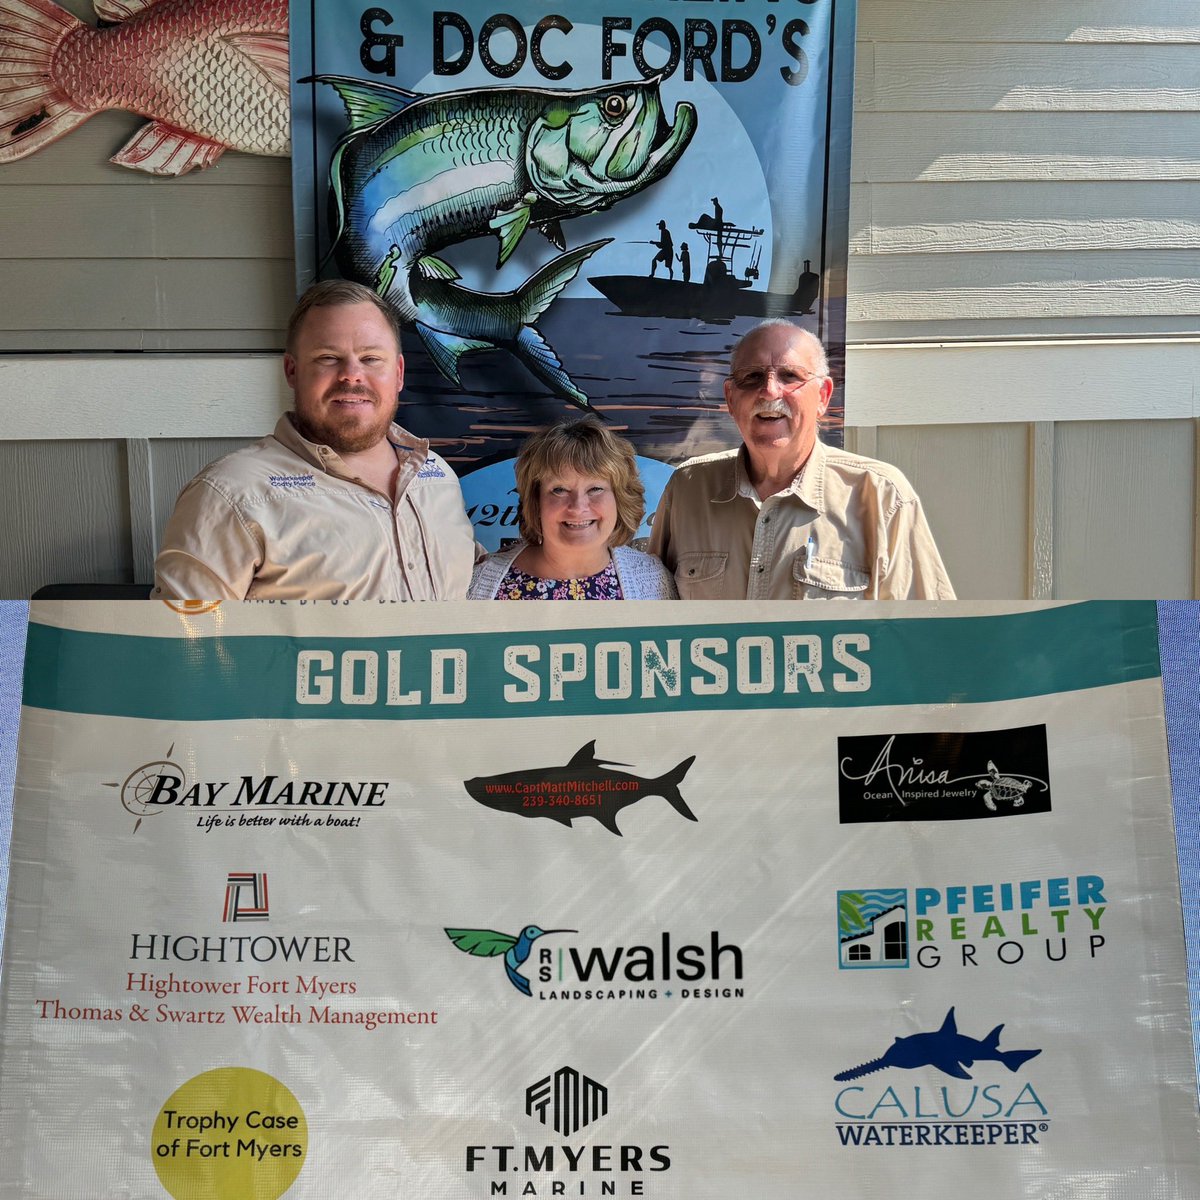 Wonderful time at the “Ding” Darling & Doc Ford’s Tarpon Tournament Dinner last night!